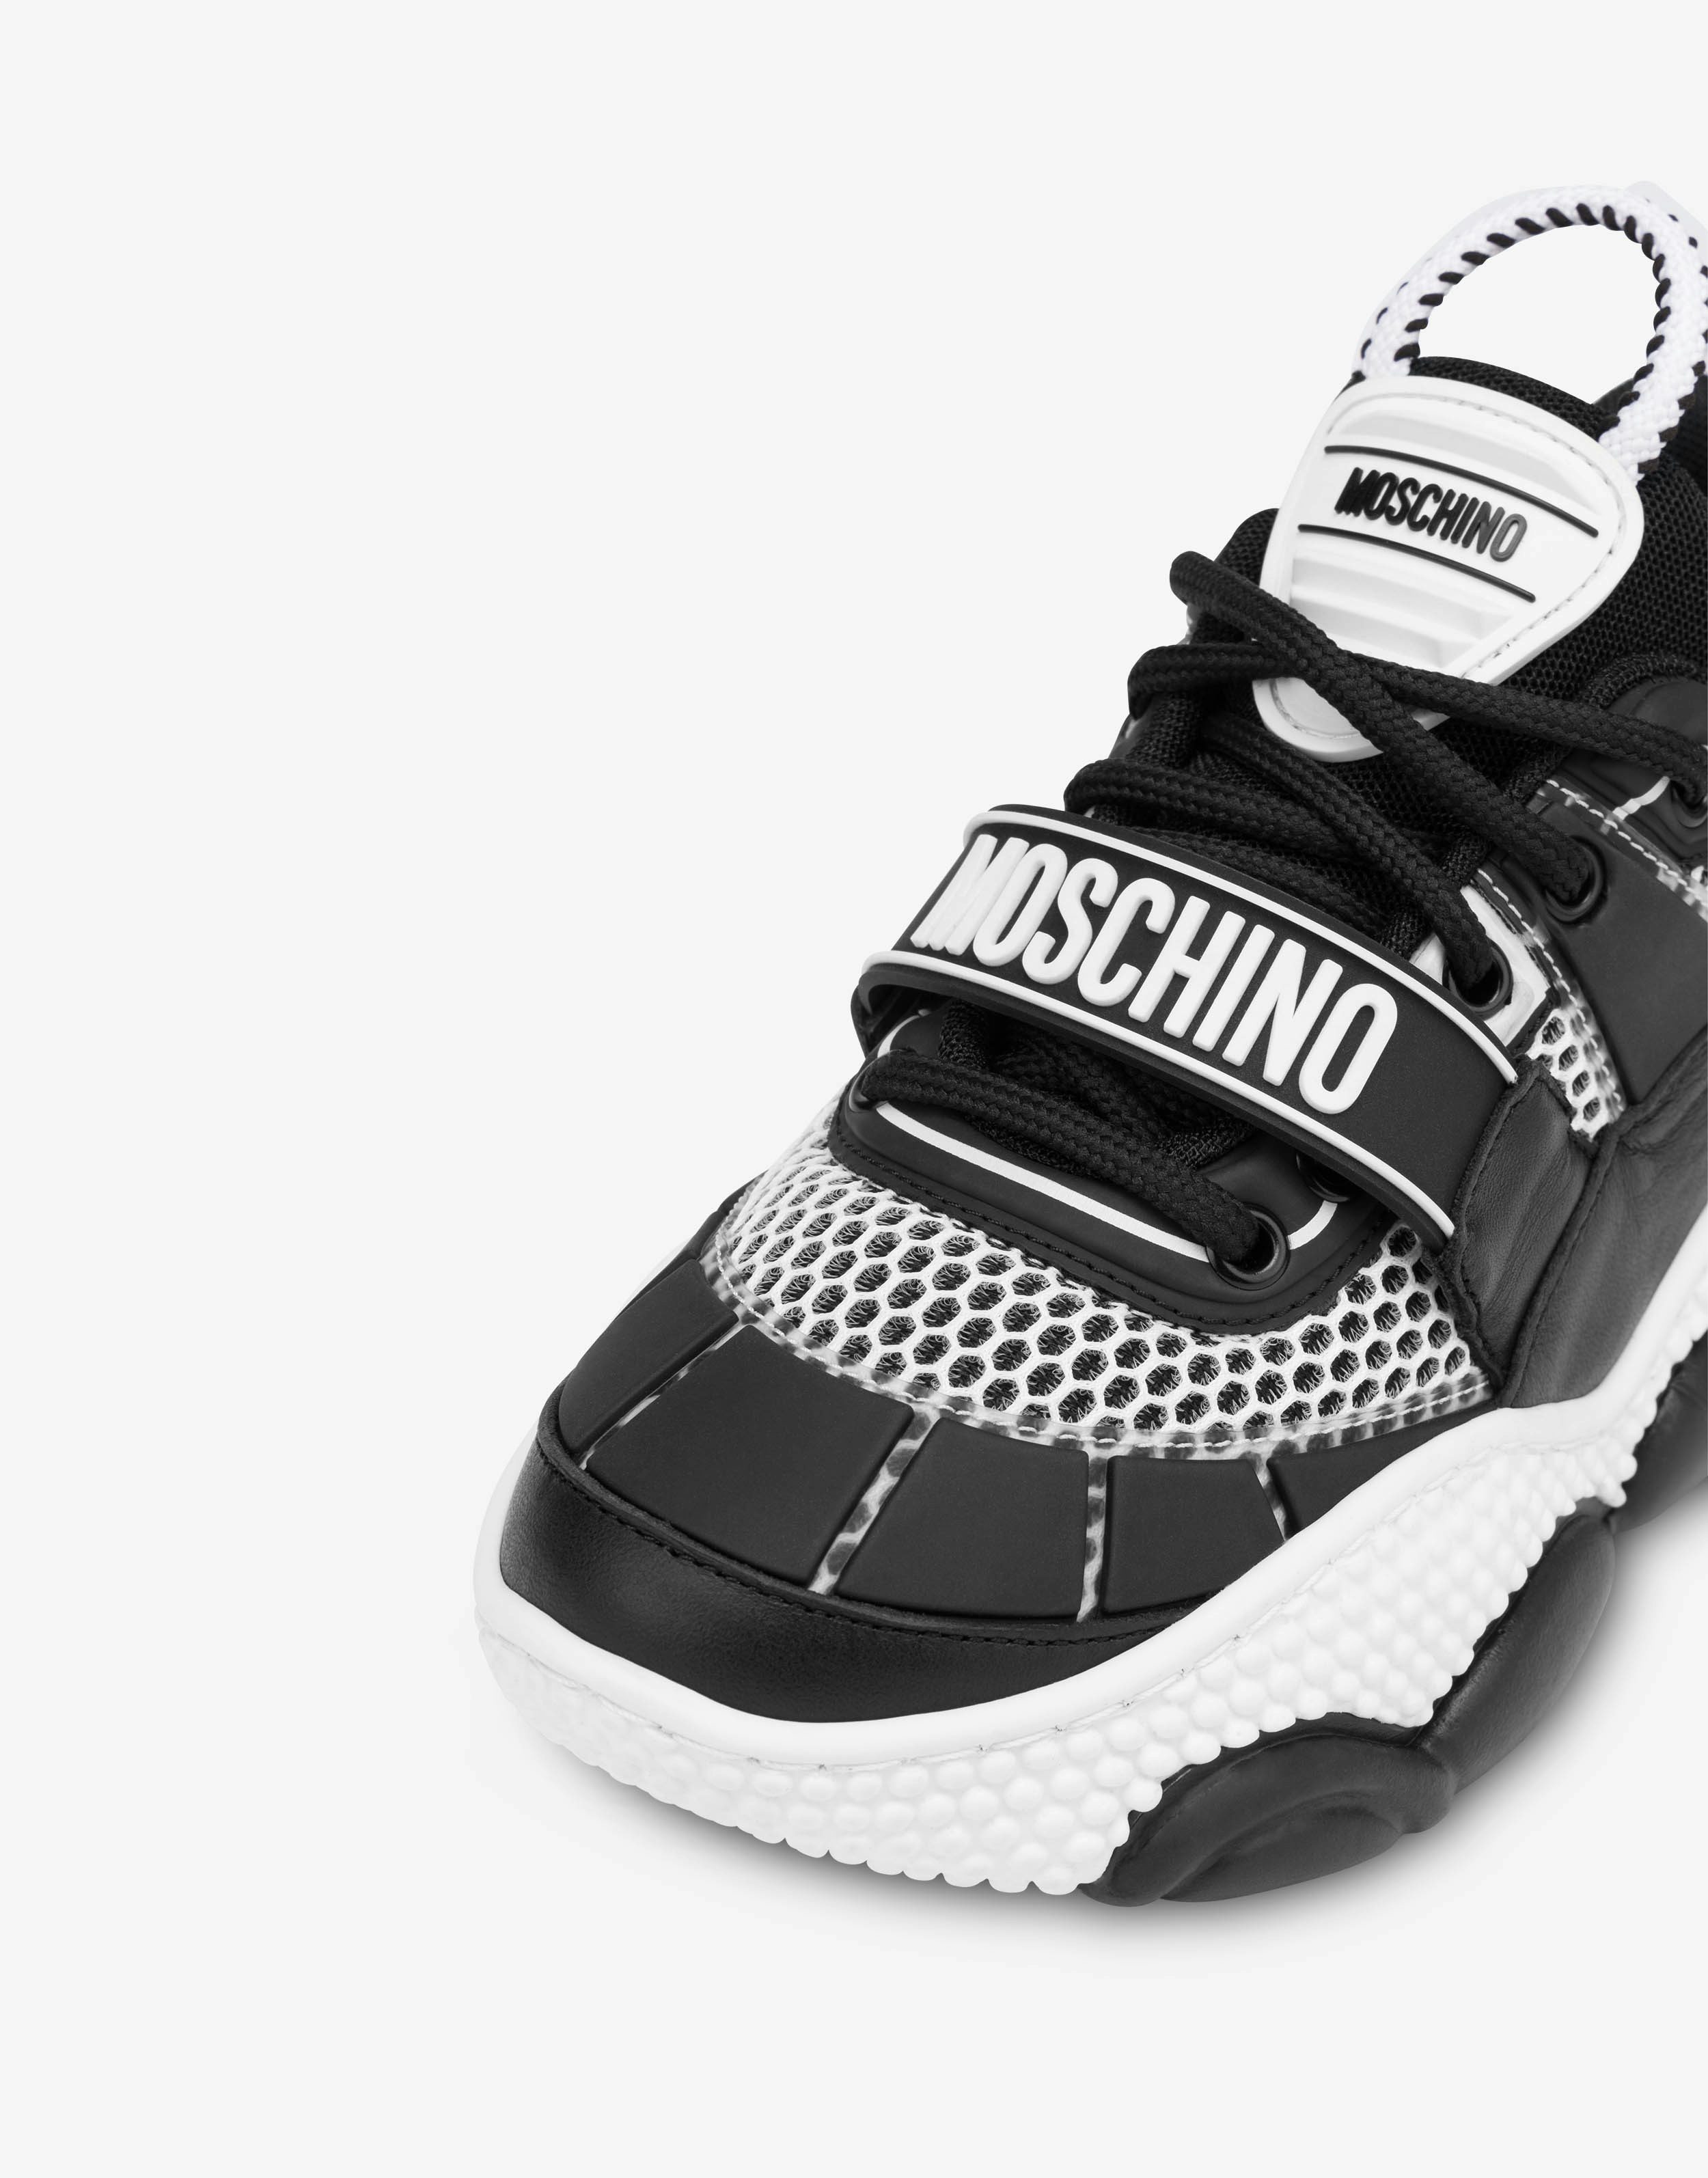 Moschino Teddy Pop shoes 3